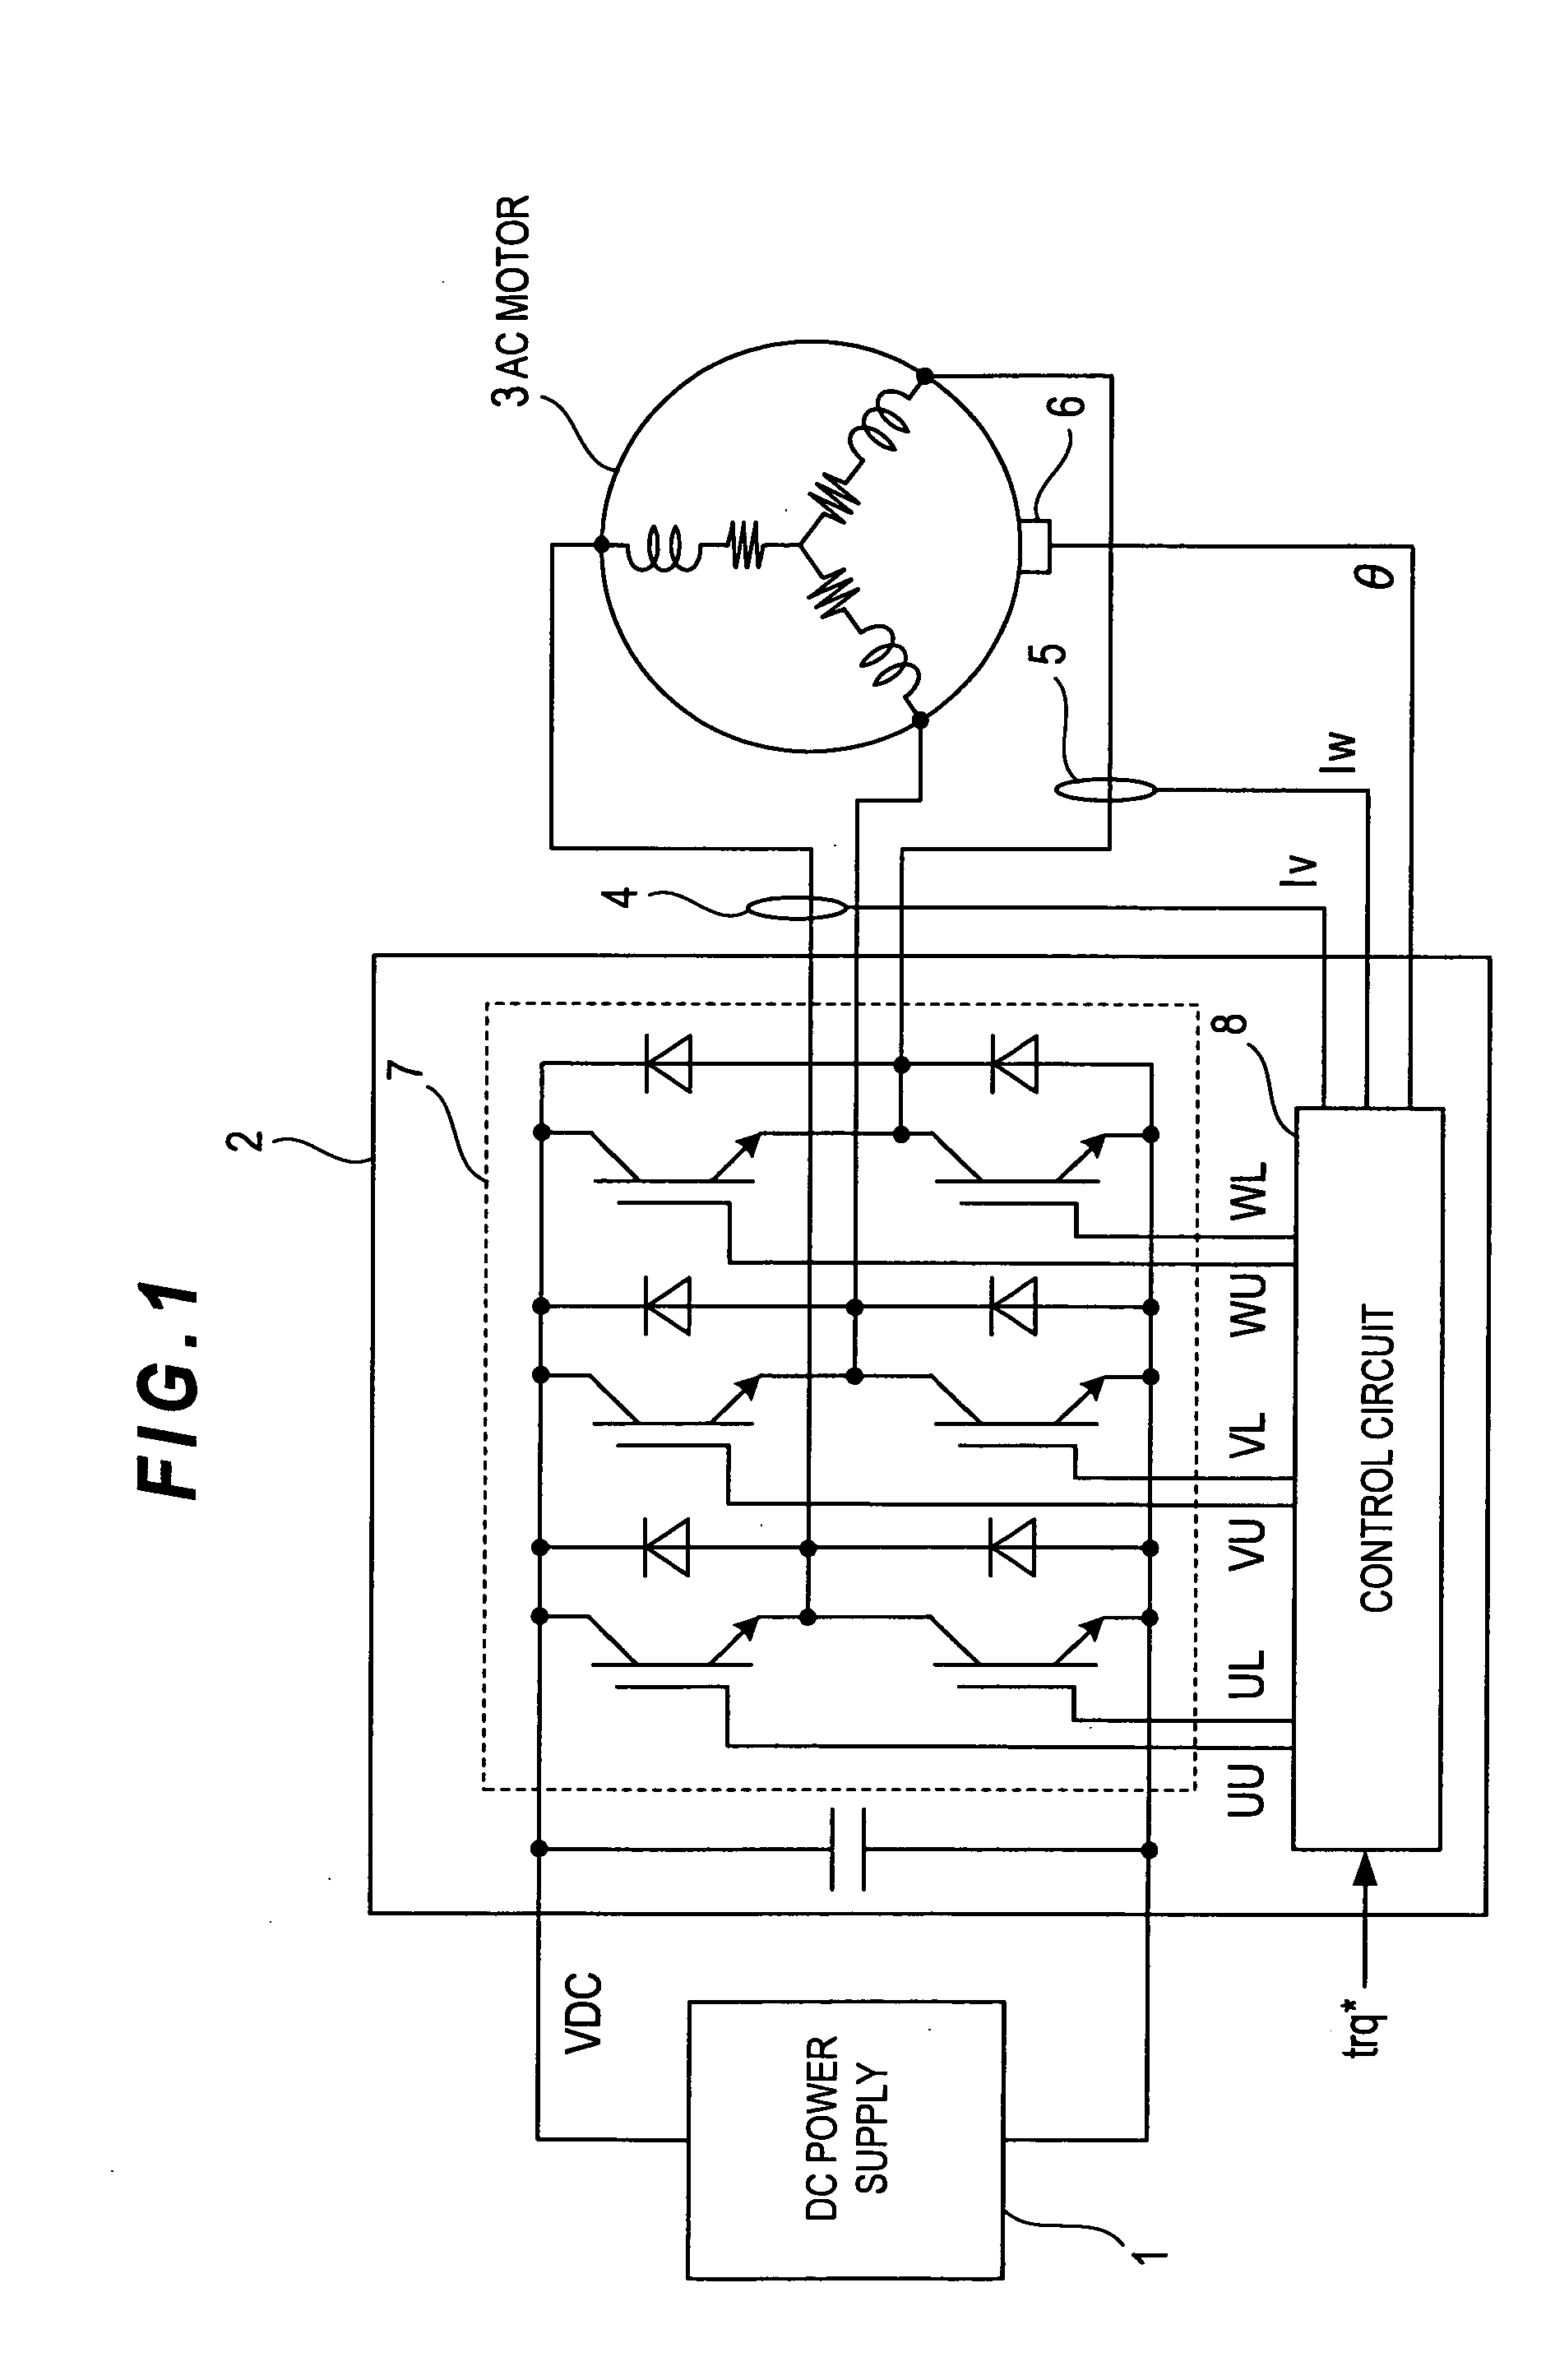 Apparatus for controlling three-phase AC motor on two-phase modulation technique